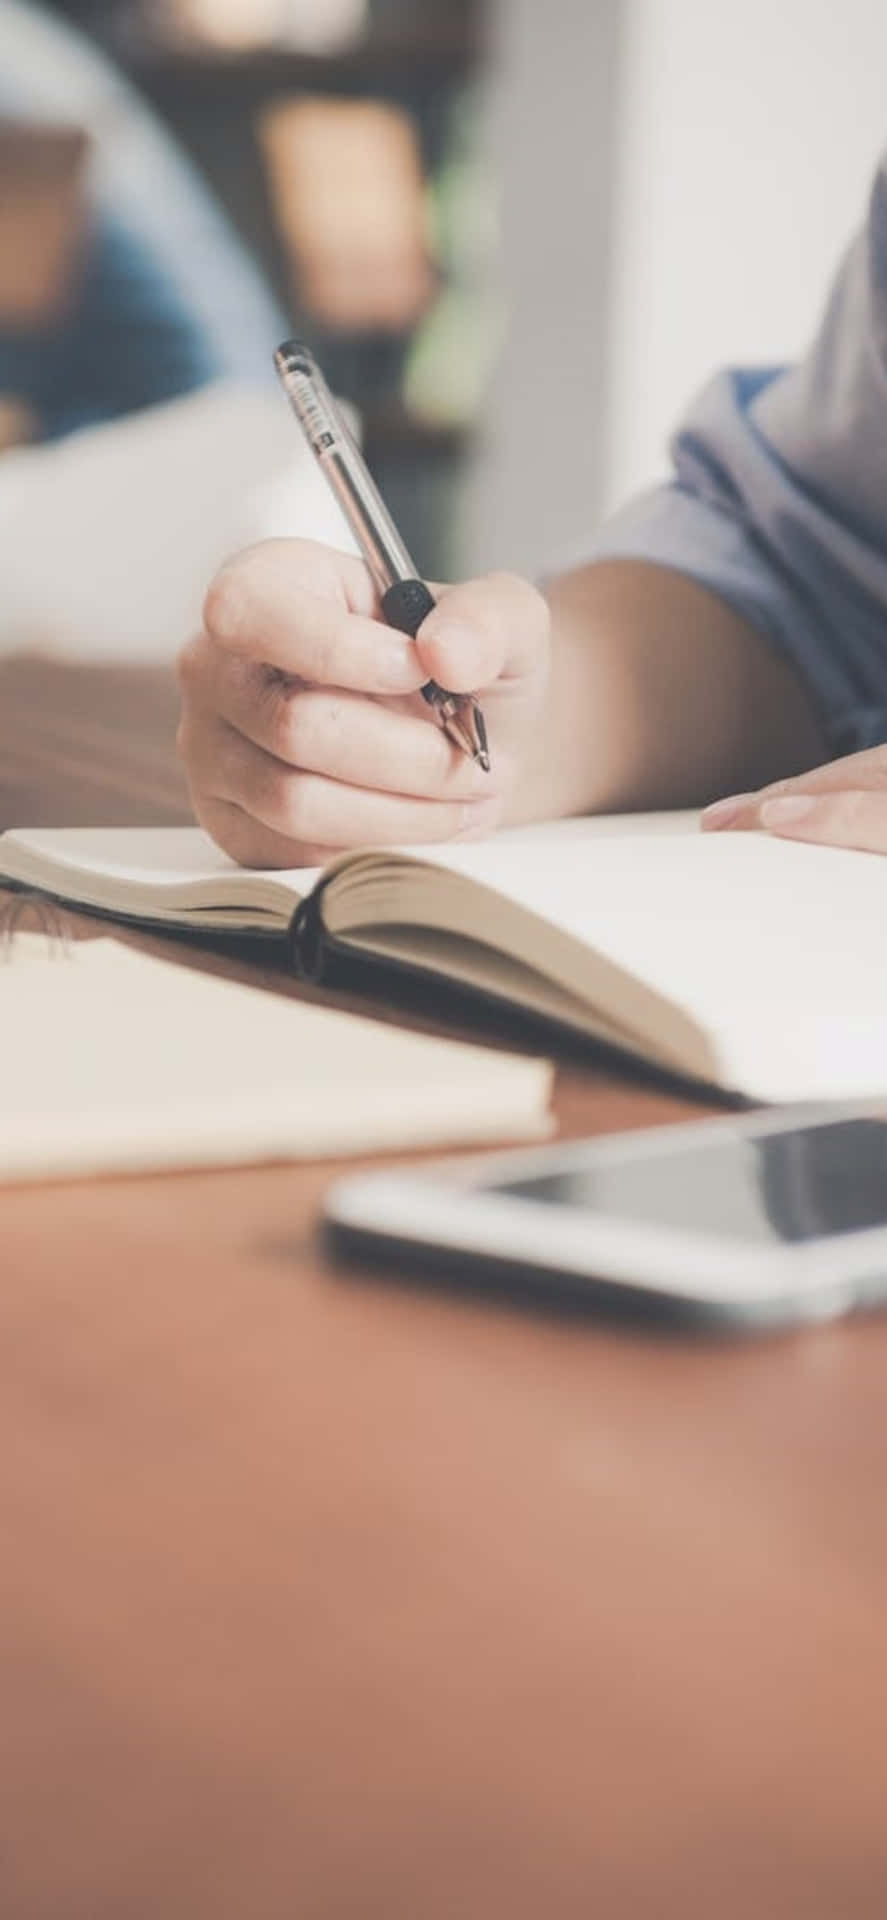 Iphone X Desk Background Person Writing On A Notebook